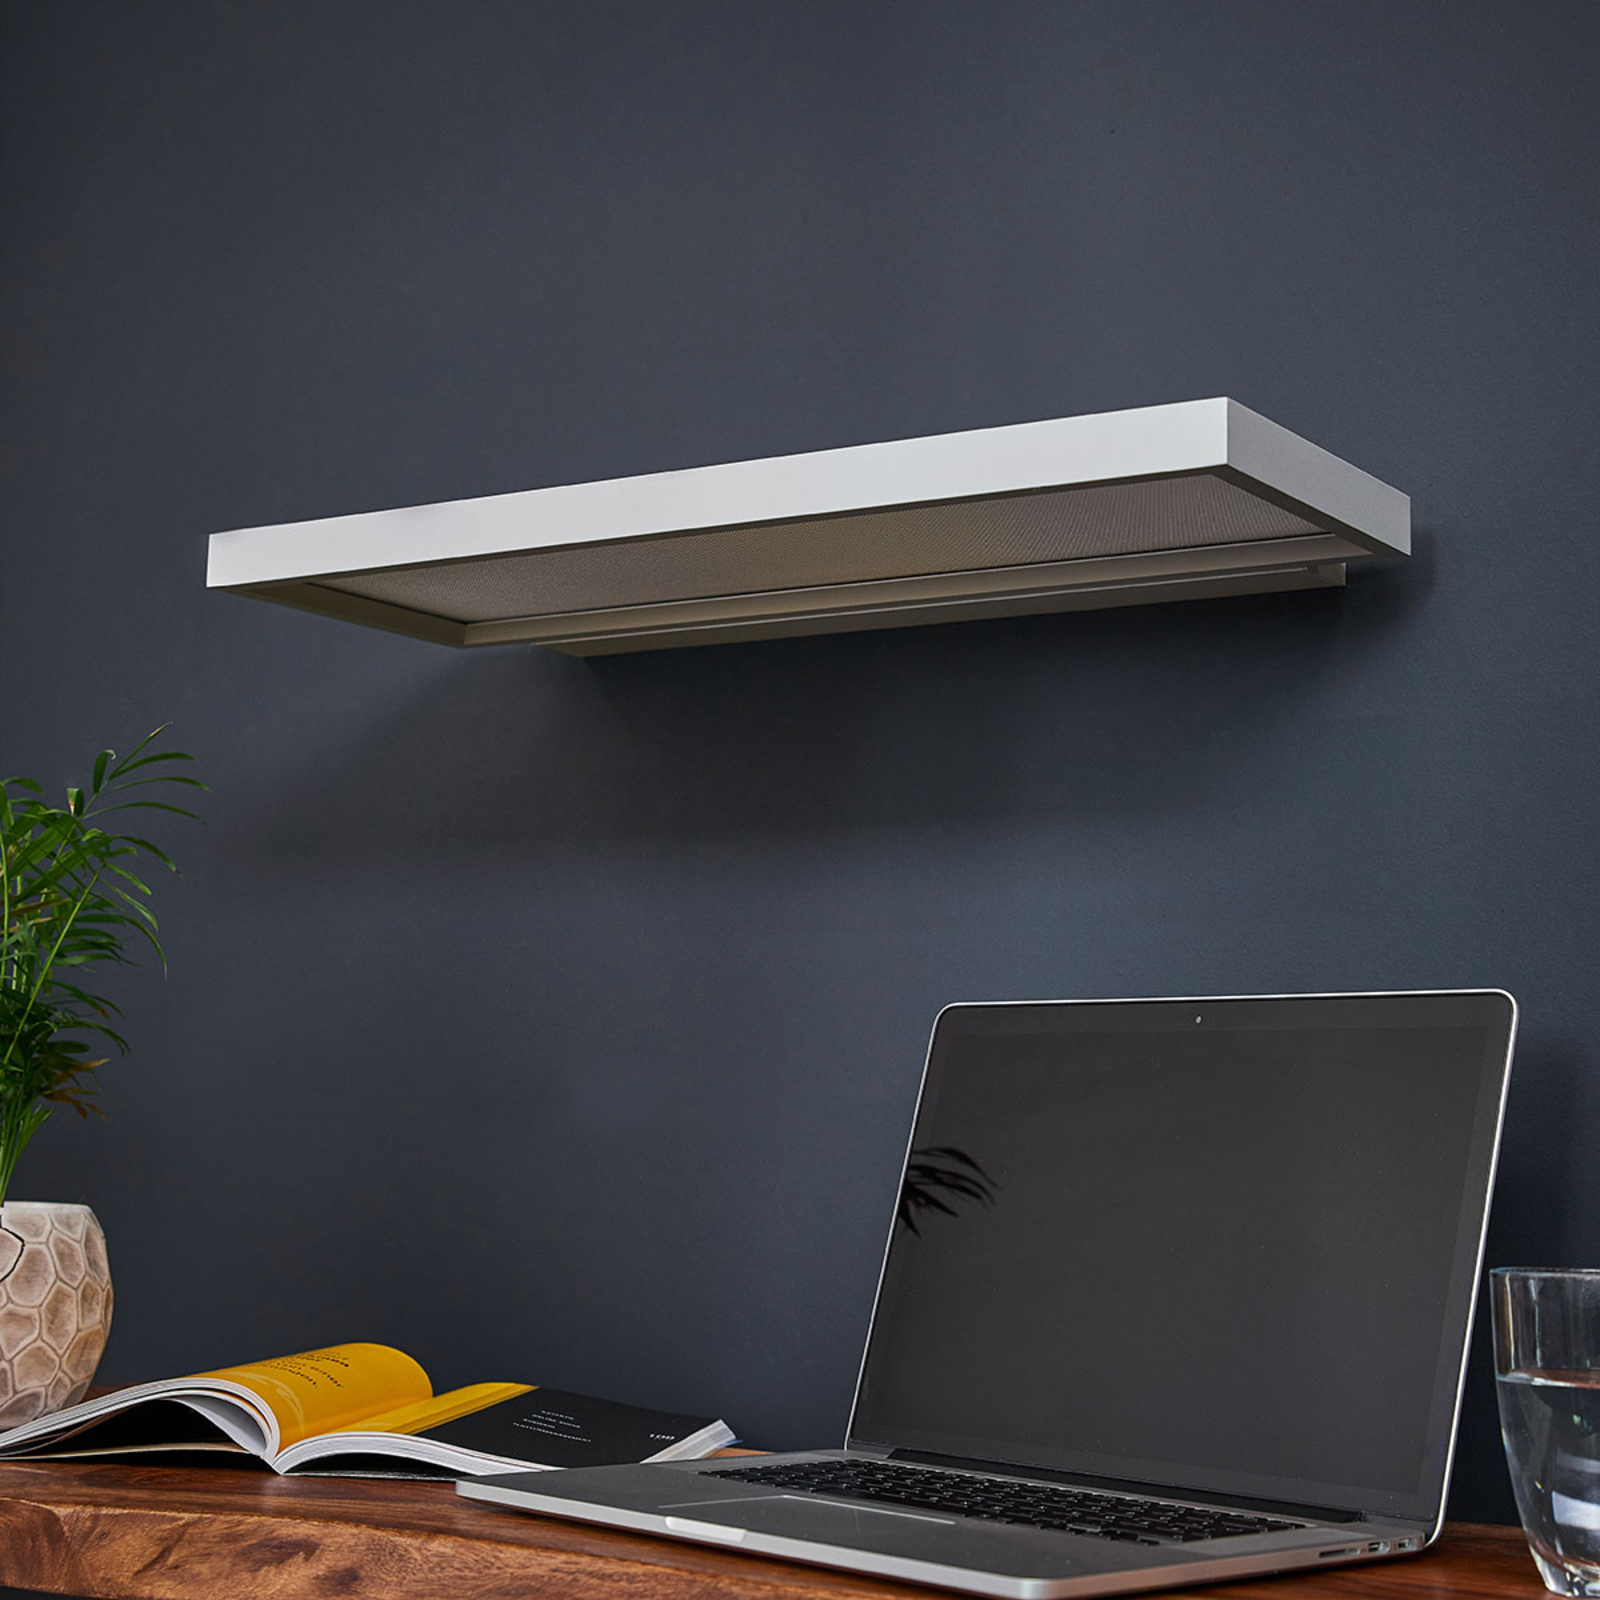 Rick LED office wall light, grey, cool white